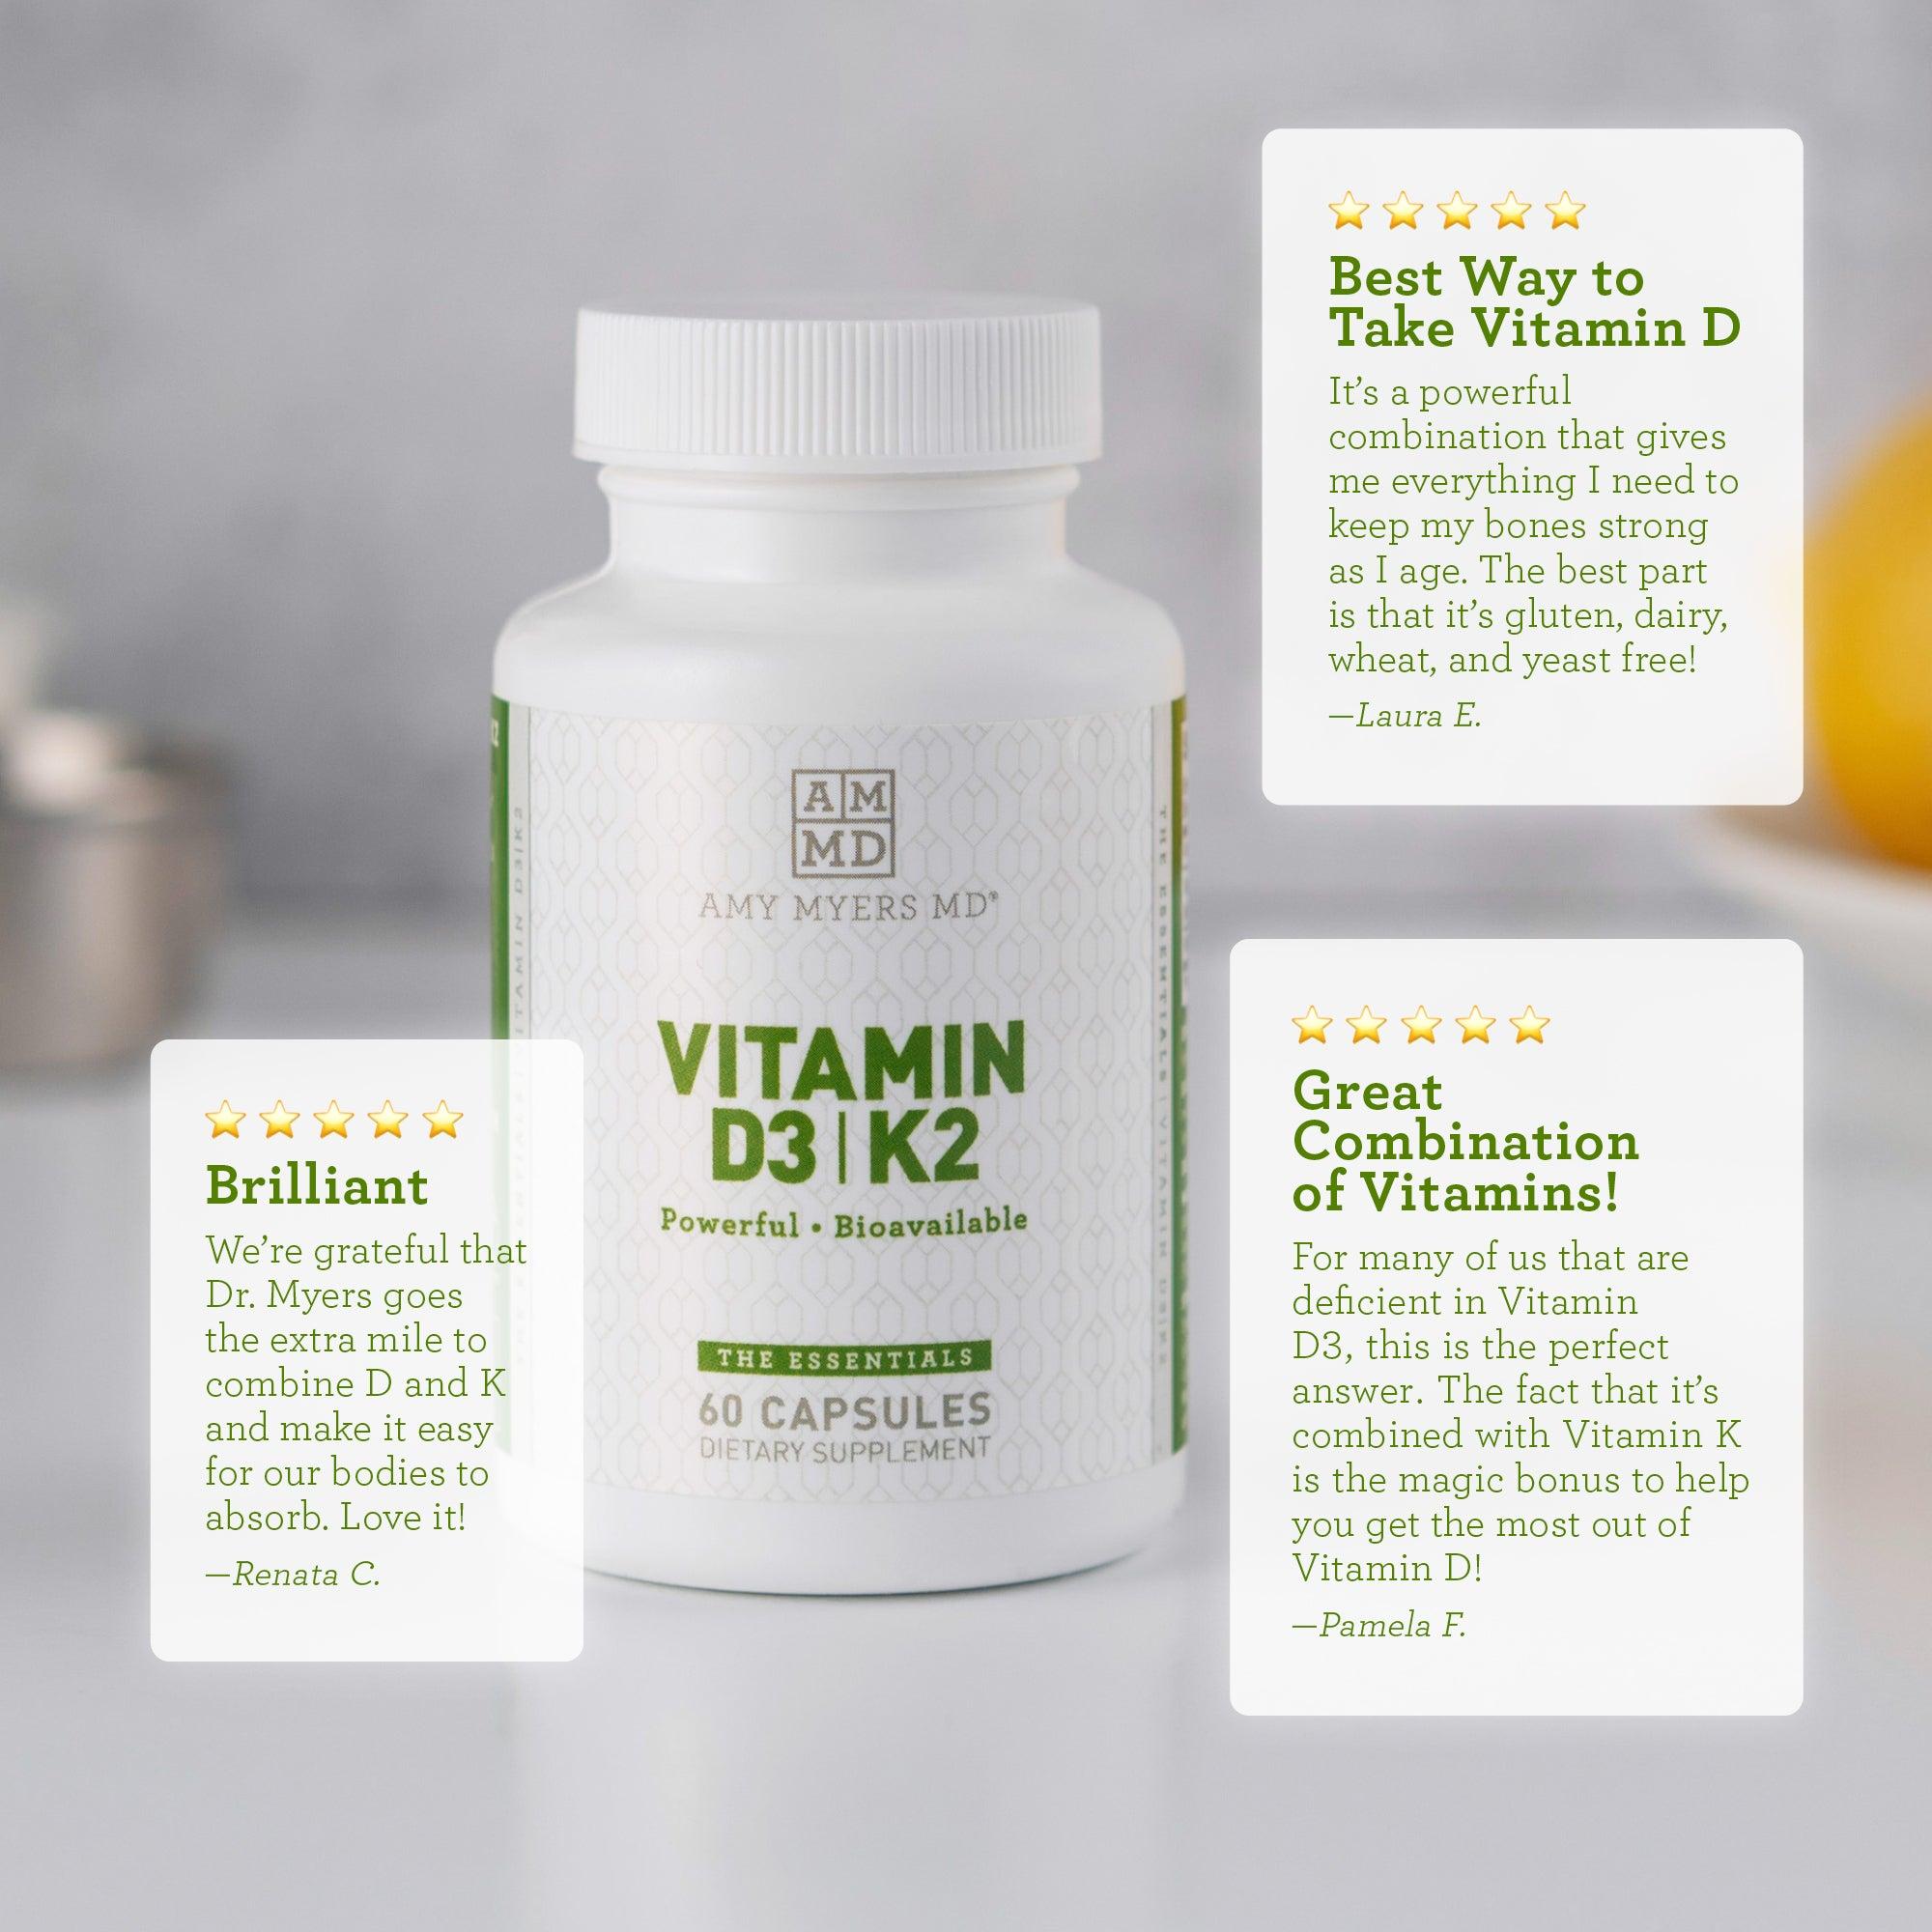 A bottle of Vitamin D3/K2 Capsules Supplement on a tabletop with reviews - Reviews Image - Amy Myers MD®